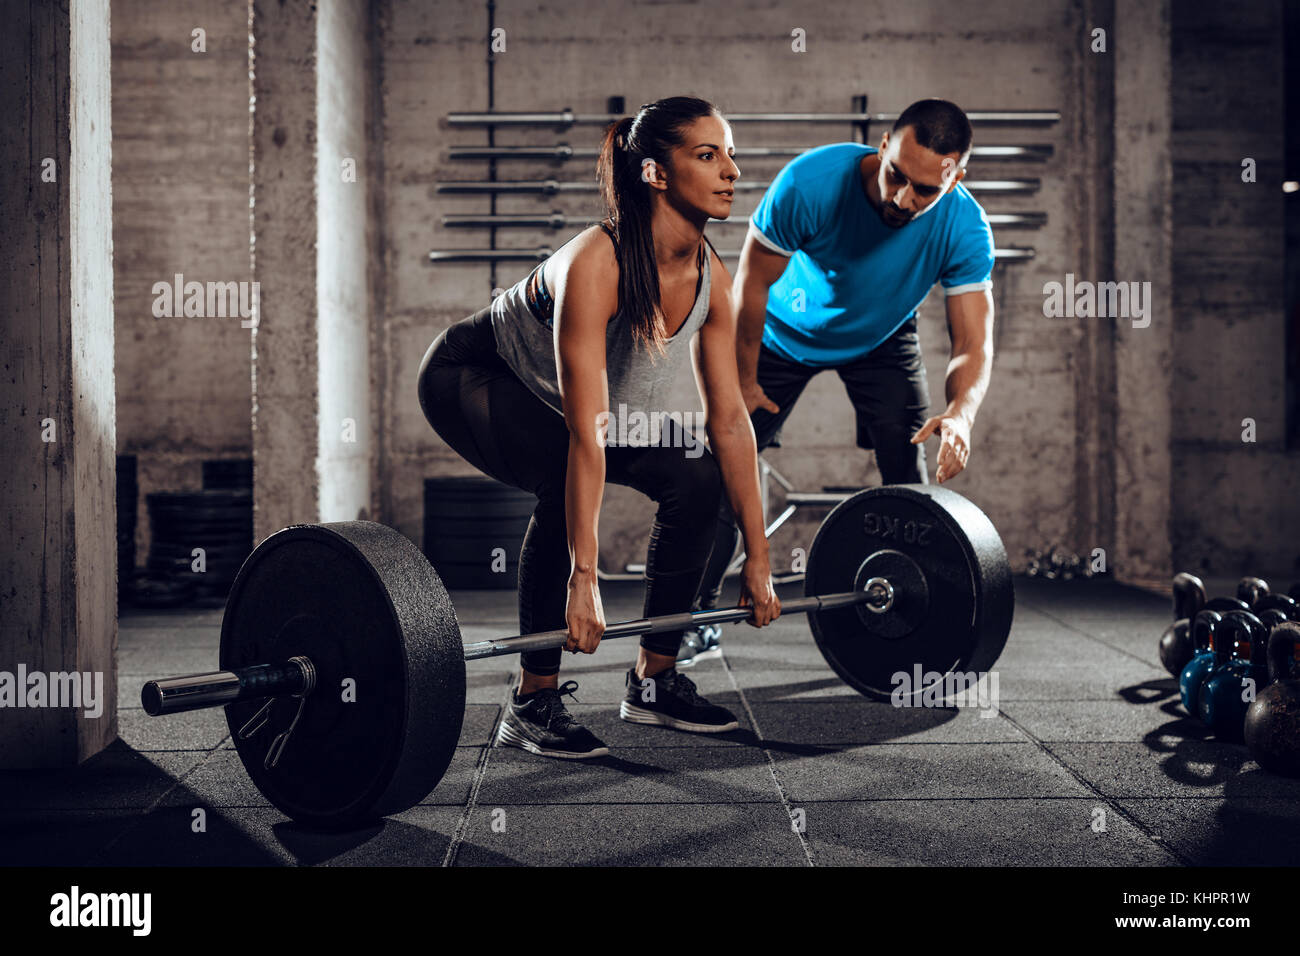 Young woman doing hard exercise at the gym with a personal trainer. Stock Photo